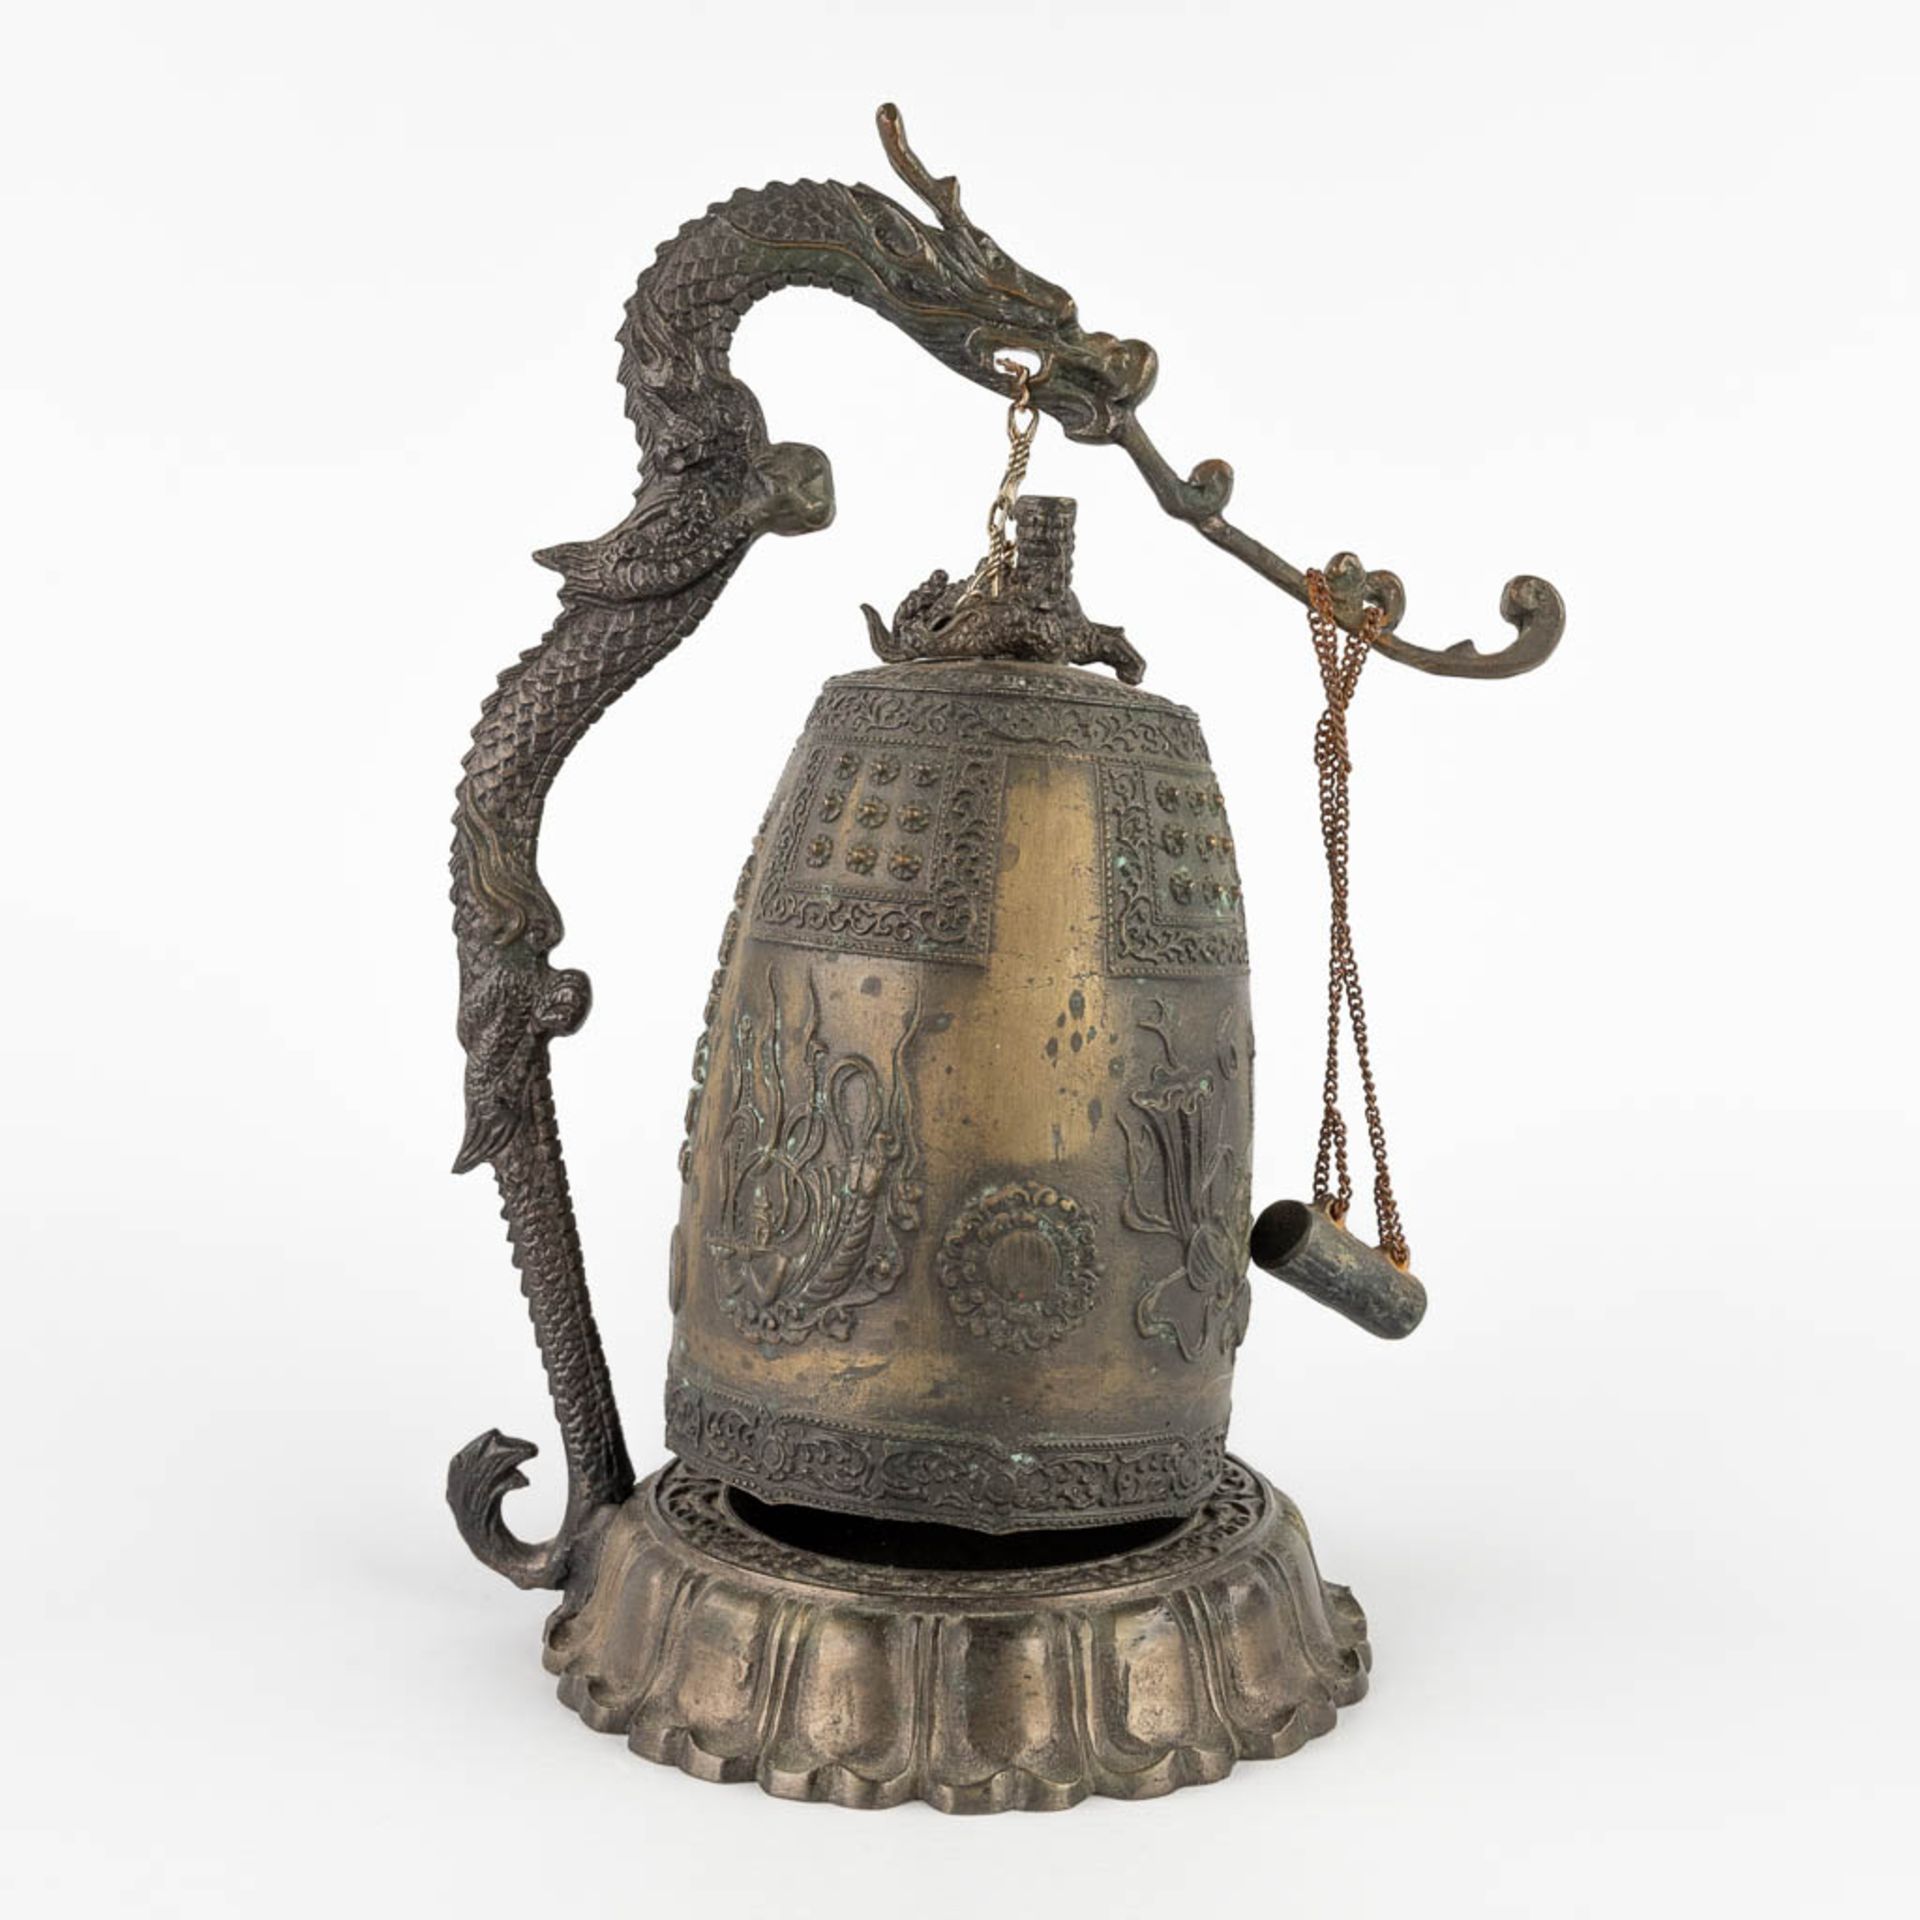 3 bells and a gong, Oriental. 19th/20th C. (L:13 x W:47 x H:55 cm) - Image 9 of 28